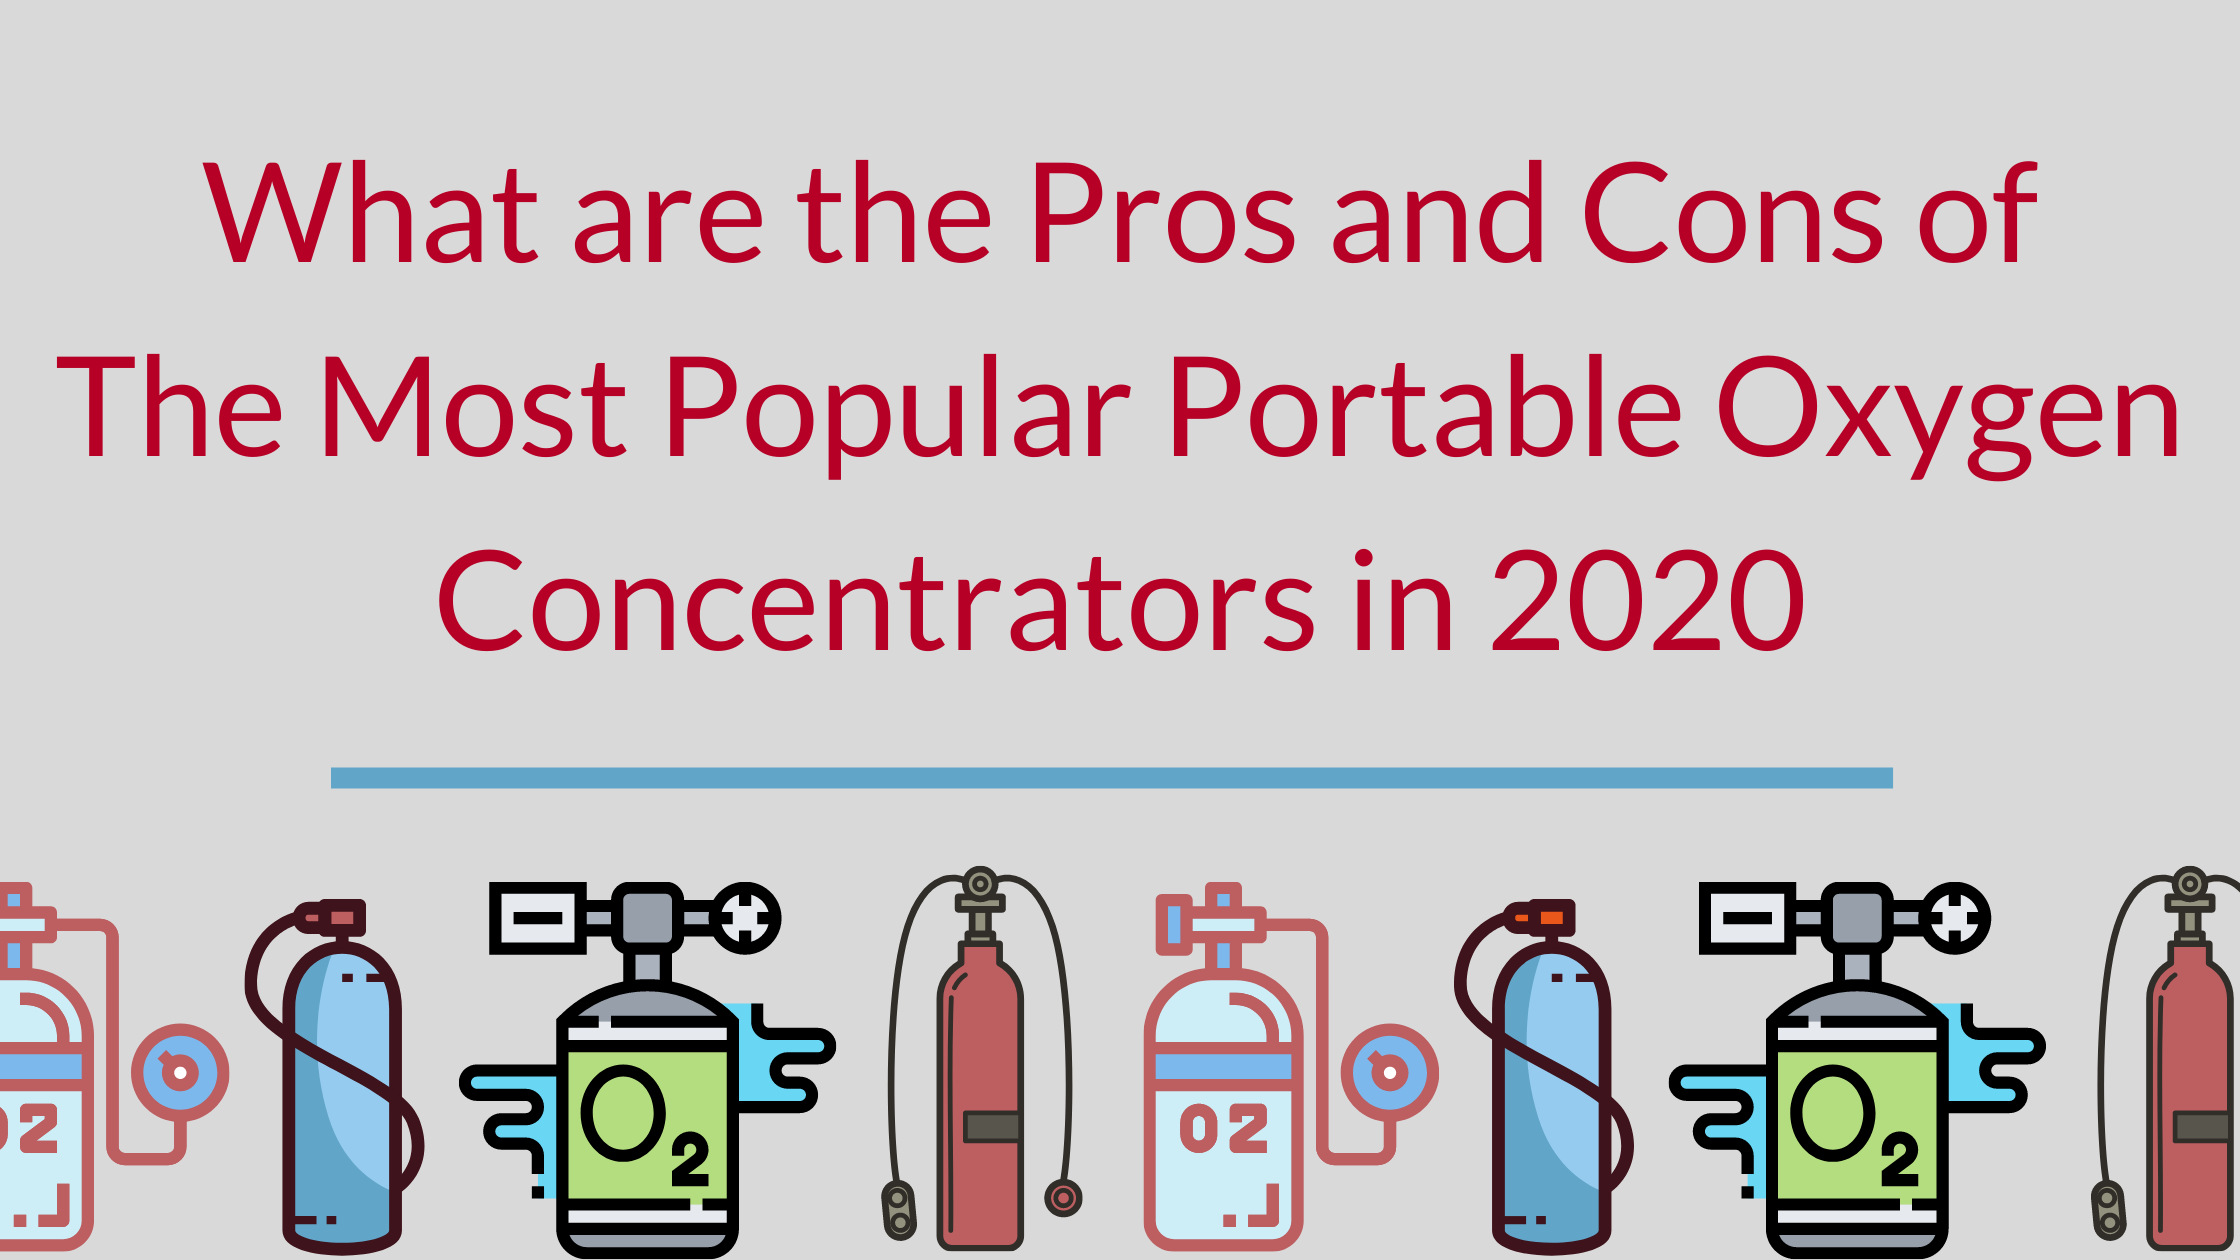 Pros and Cons of The Most Popular Portable Oxygen Concentrators in 2020